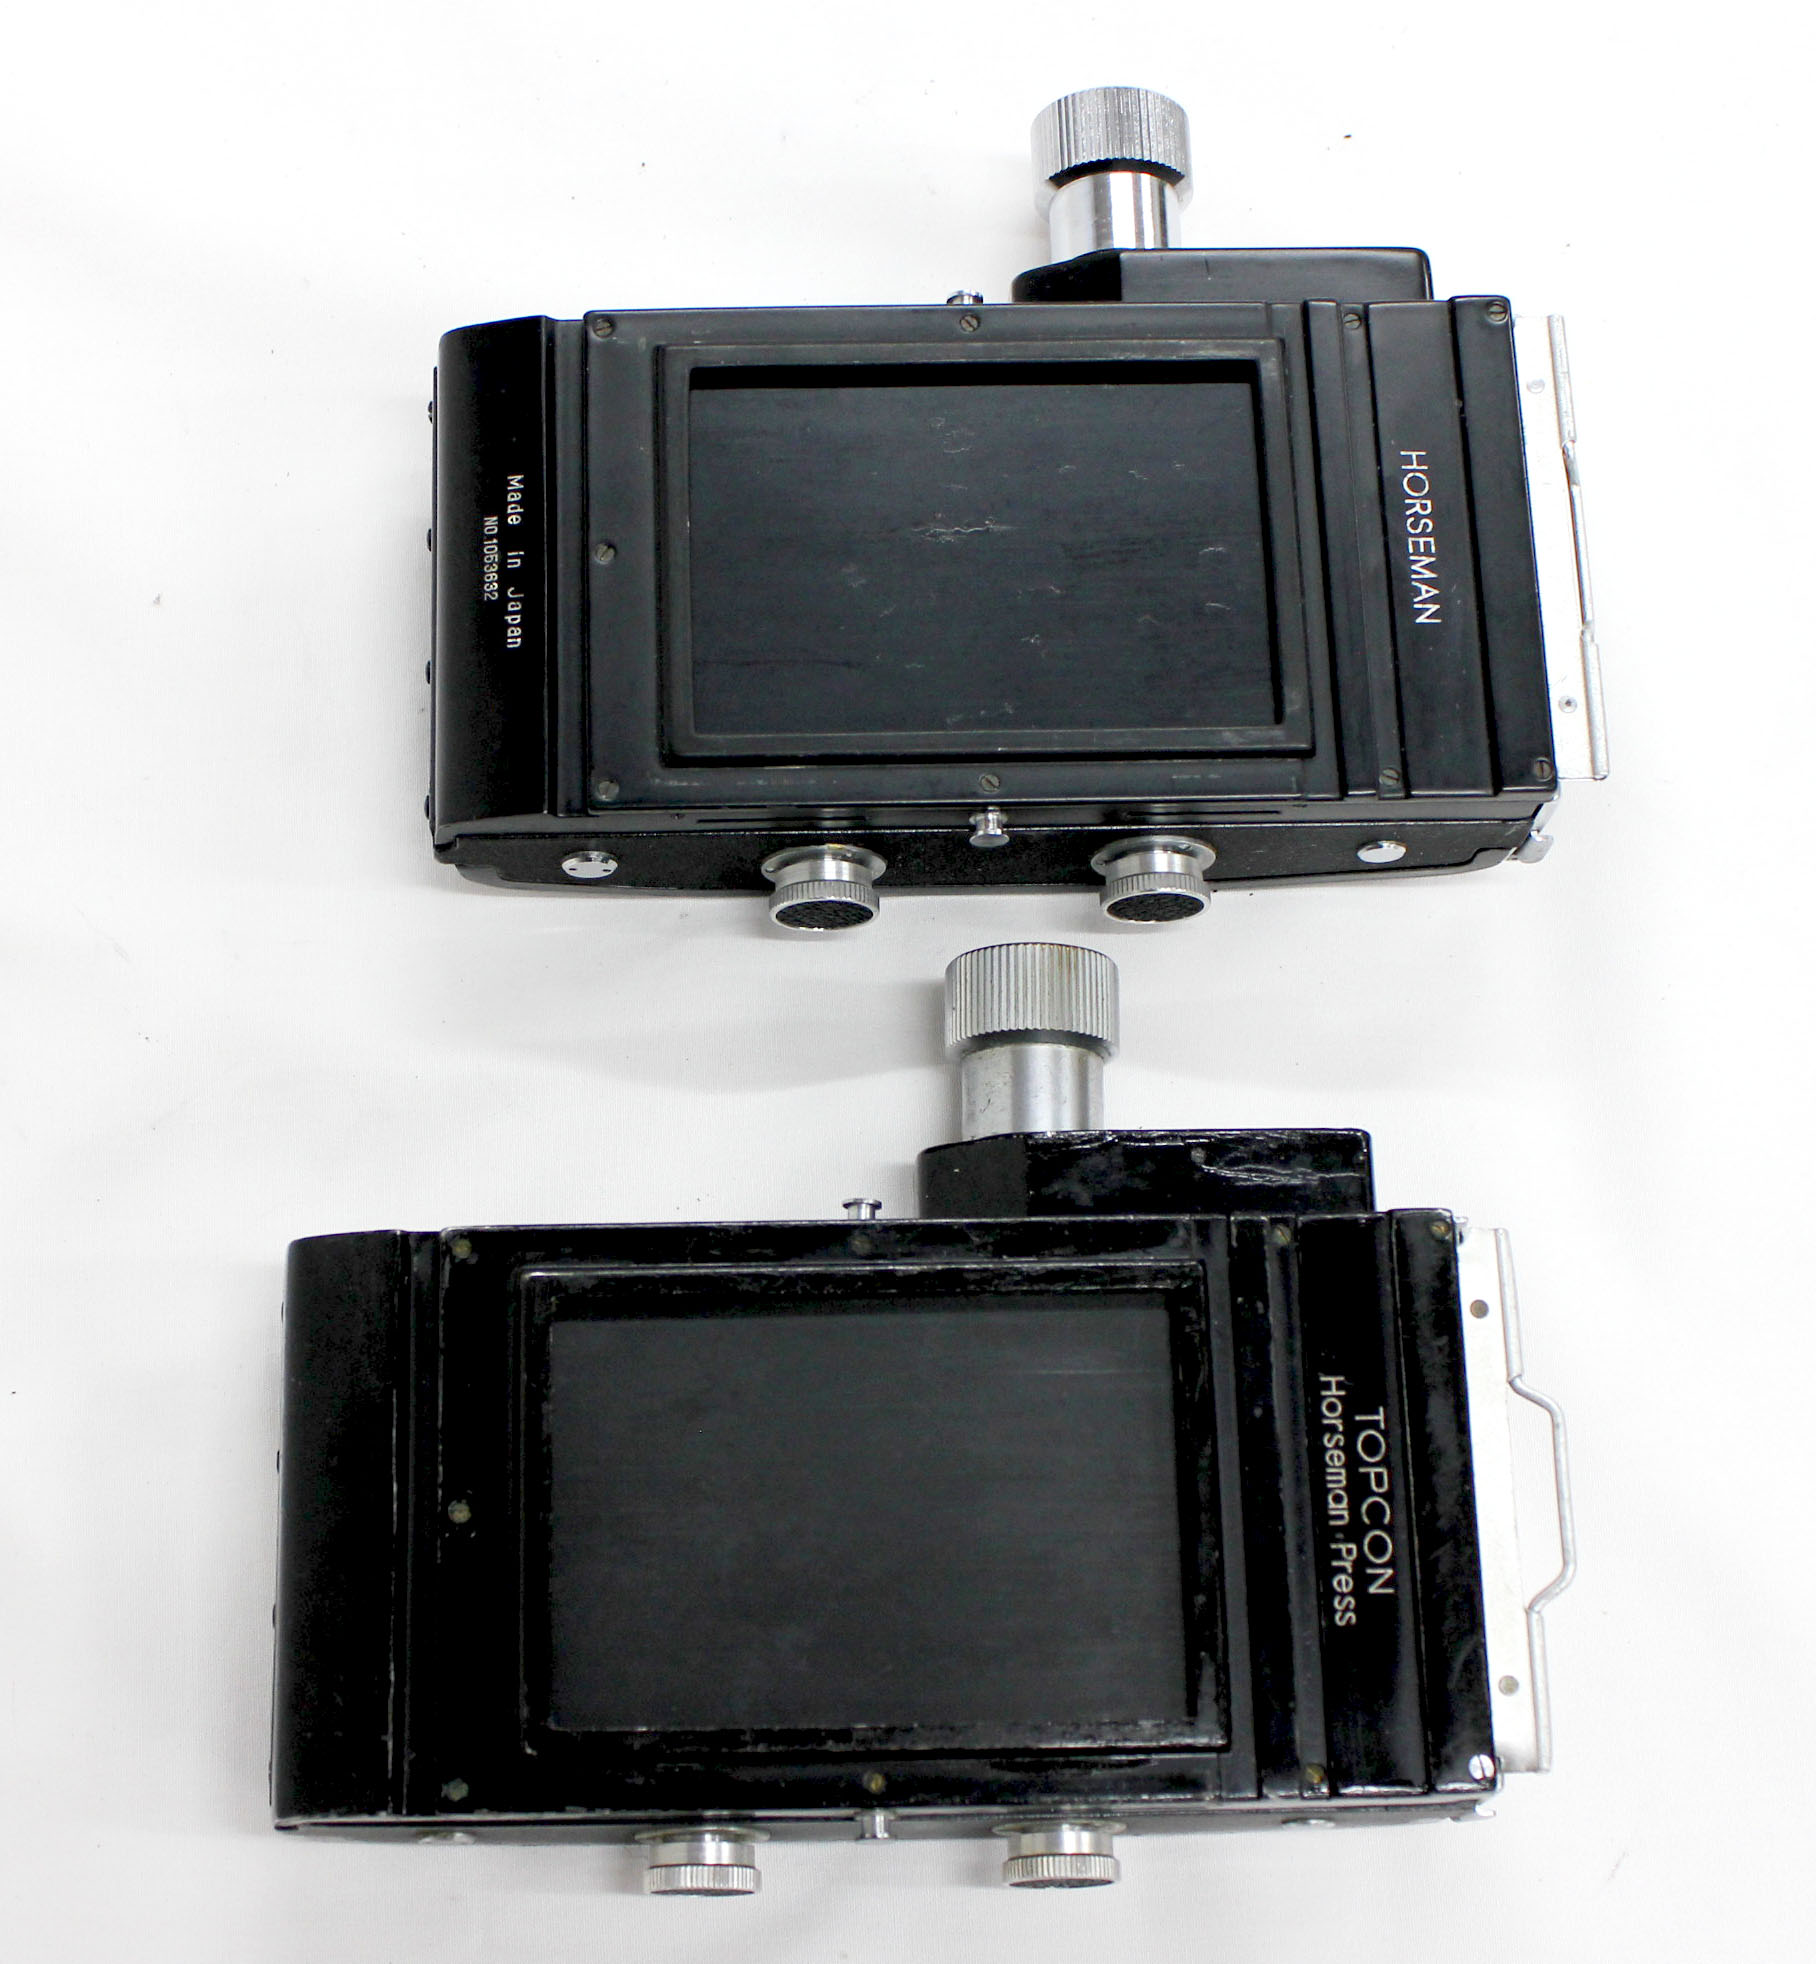 Topcon Horseman Press 6x9 Roll Film Back Holder for Press/970/980/985 Set of 2 from Japan Photo 1